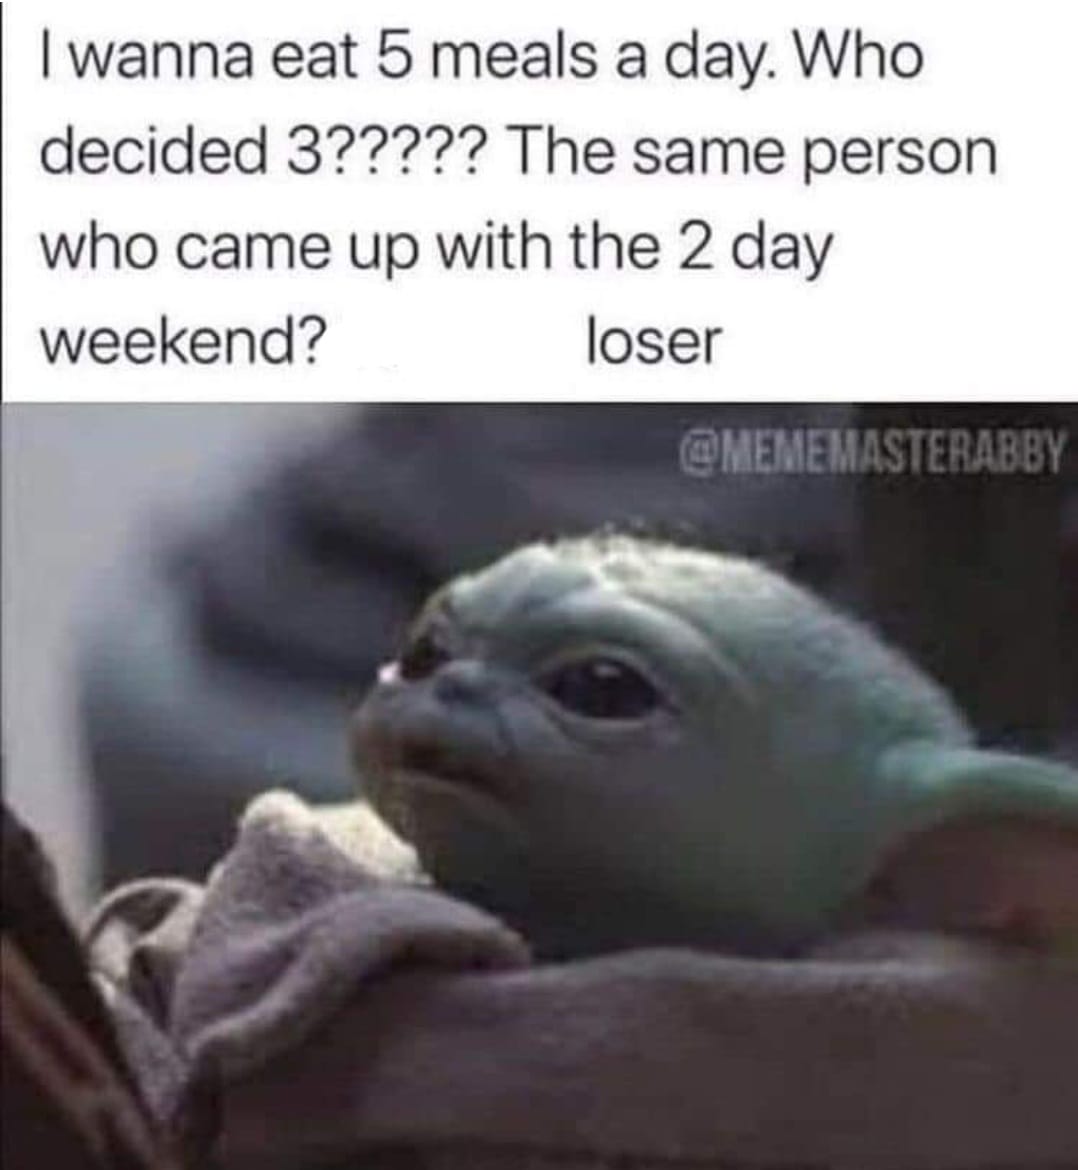 baby yoda work meme - I wanna eat 5 meals a day. Who decided 3????? The same person who came up with the 2 day weekend? loser